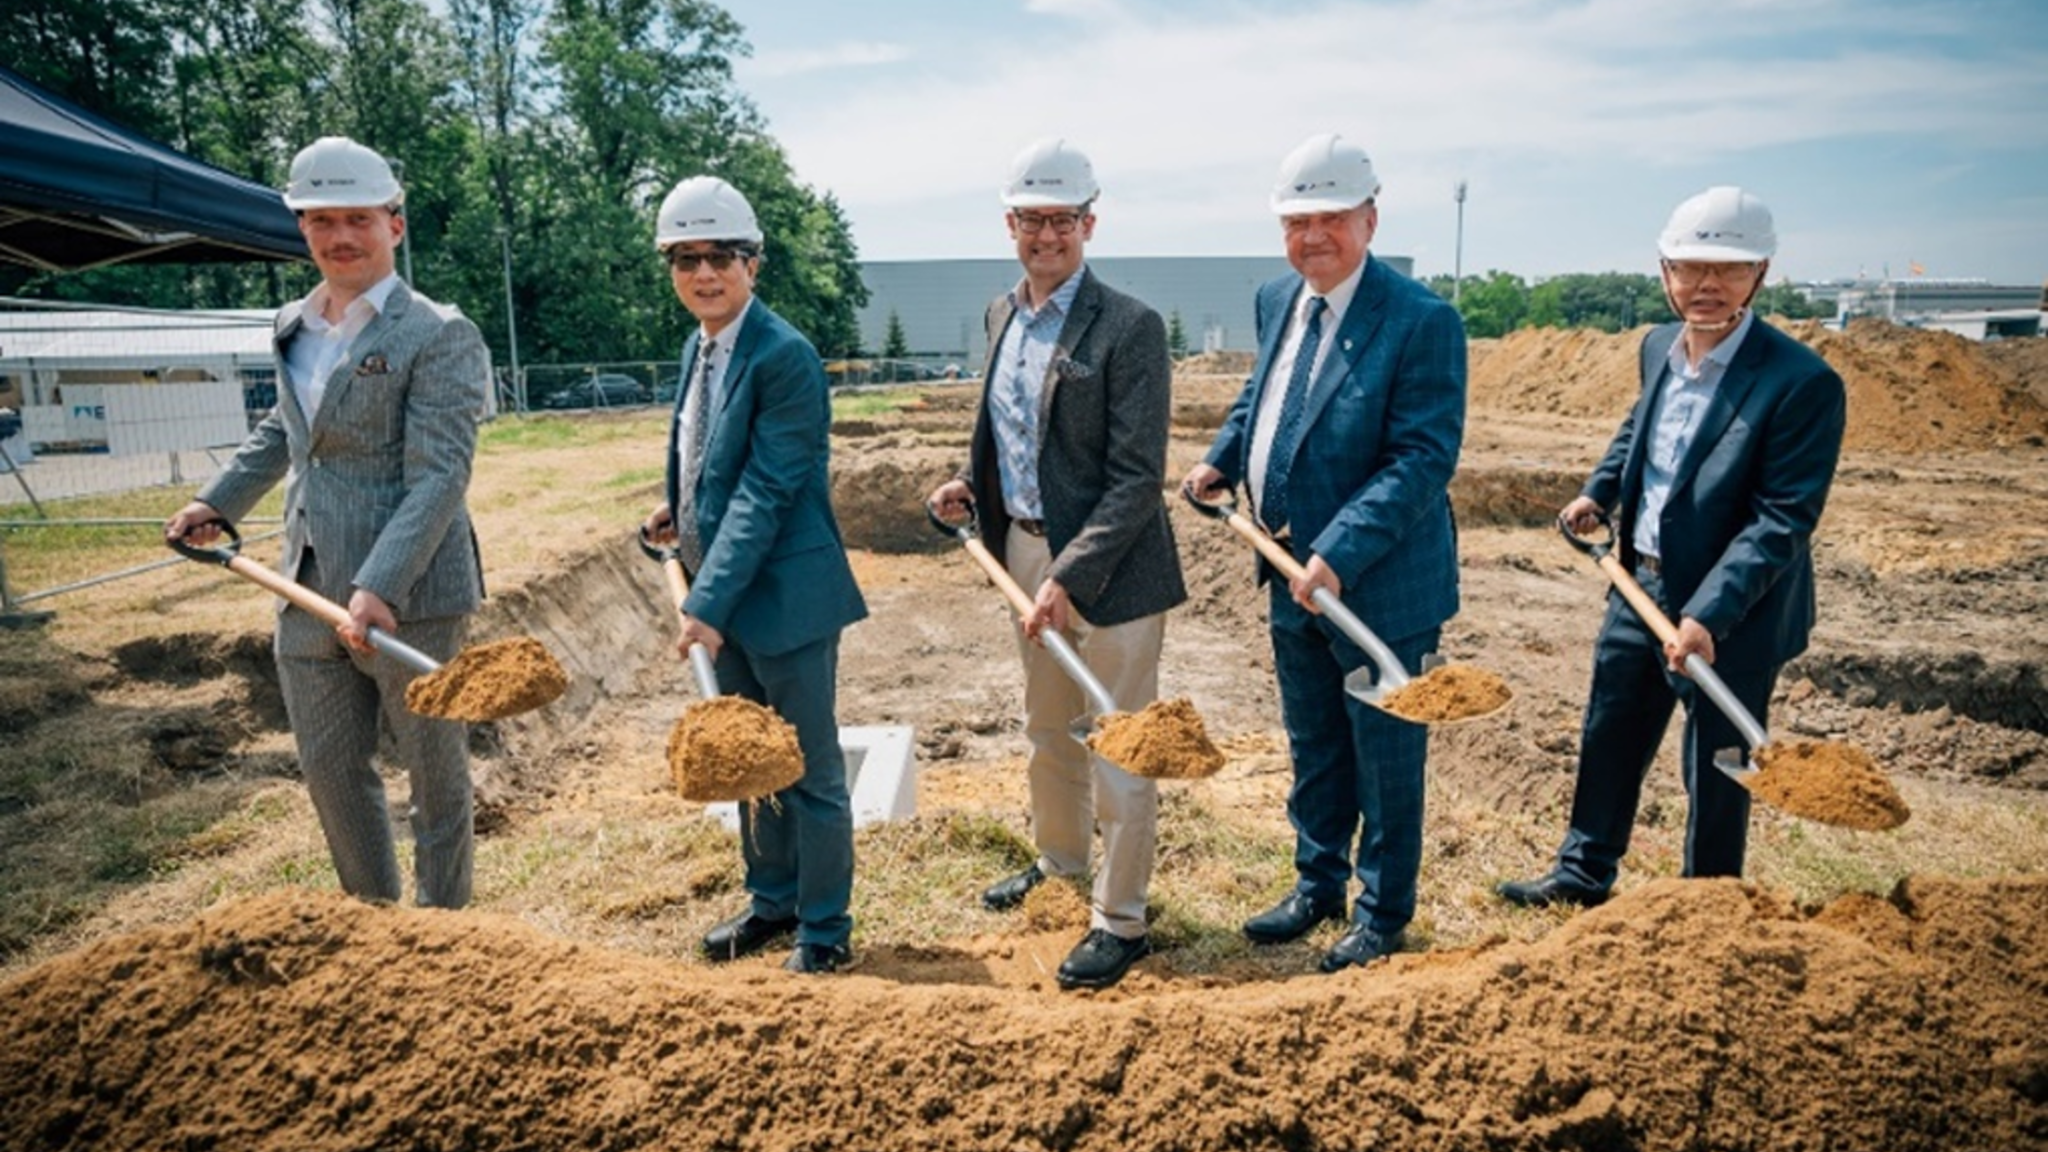 USI Expands Manufacturing Capabilities with Groundbreaking Ceremony for the Second Factory in Poland